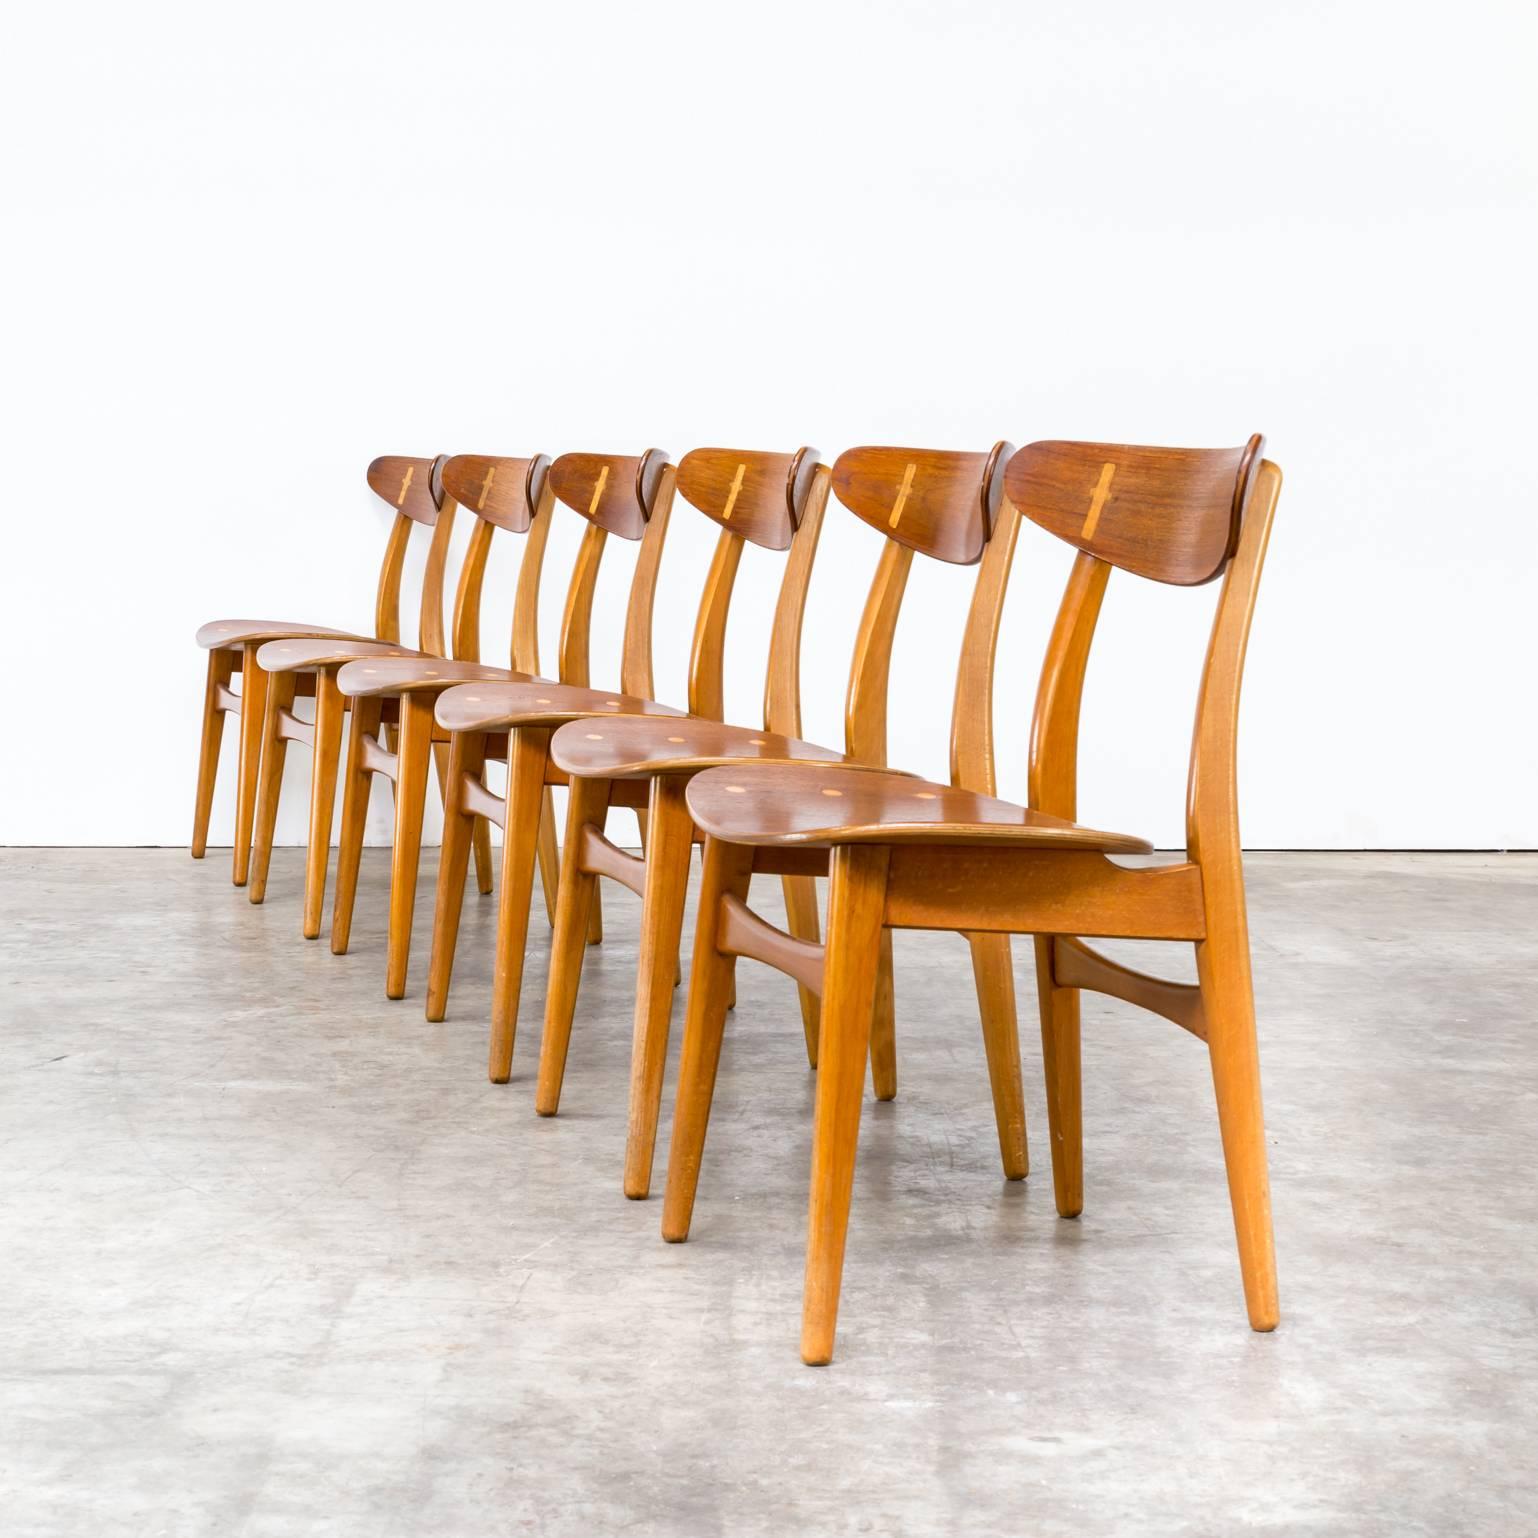 1950s Hans J Wegner CH-30 dining chairs for Carl Hansen & Son. Beautiful Scandinavian detailed design, chairs are in very good condition with only some slight spurs of age and use.